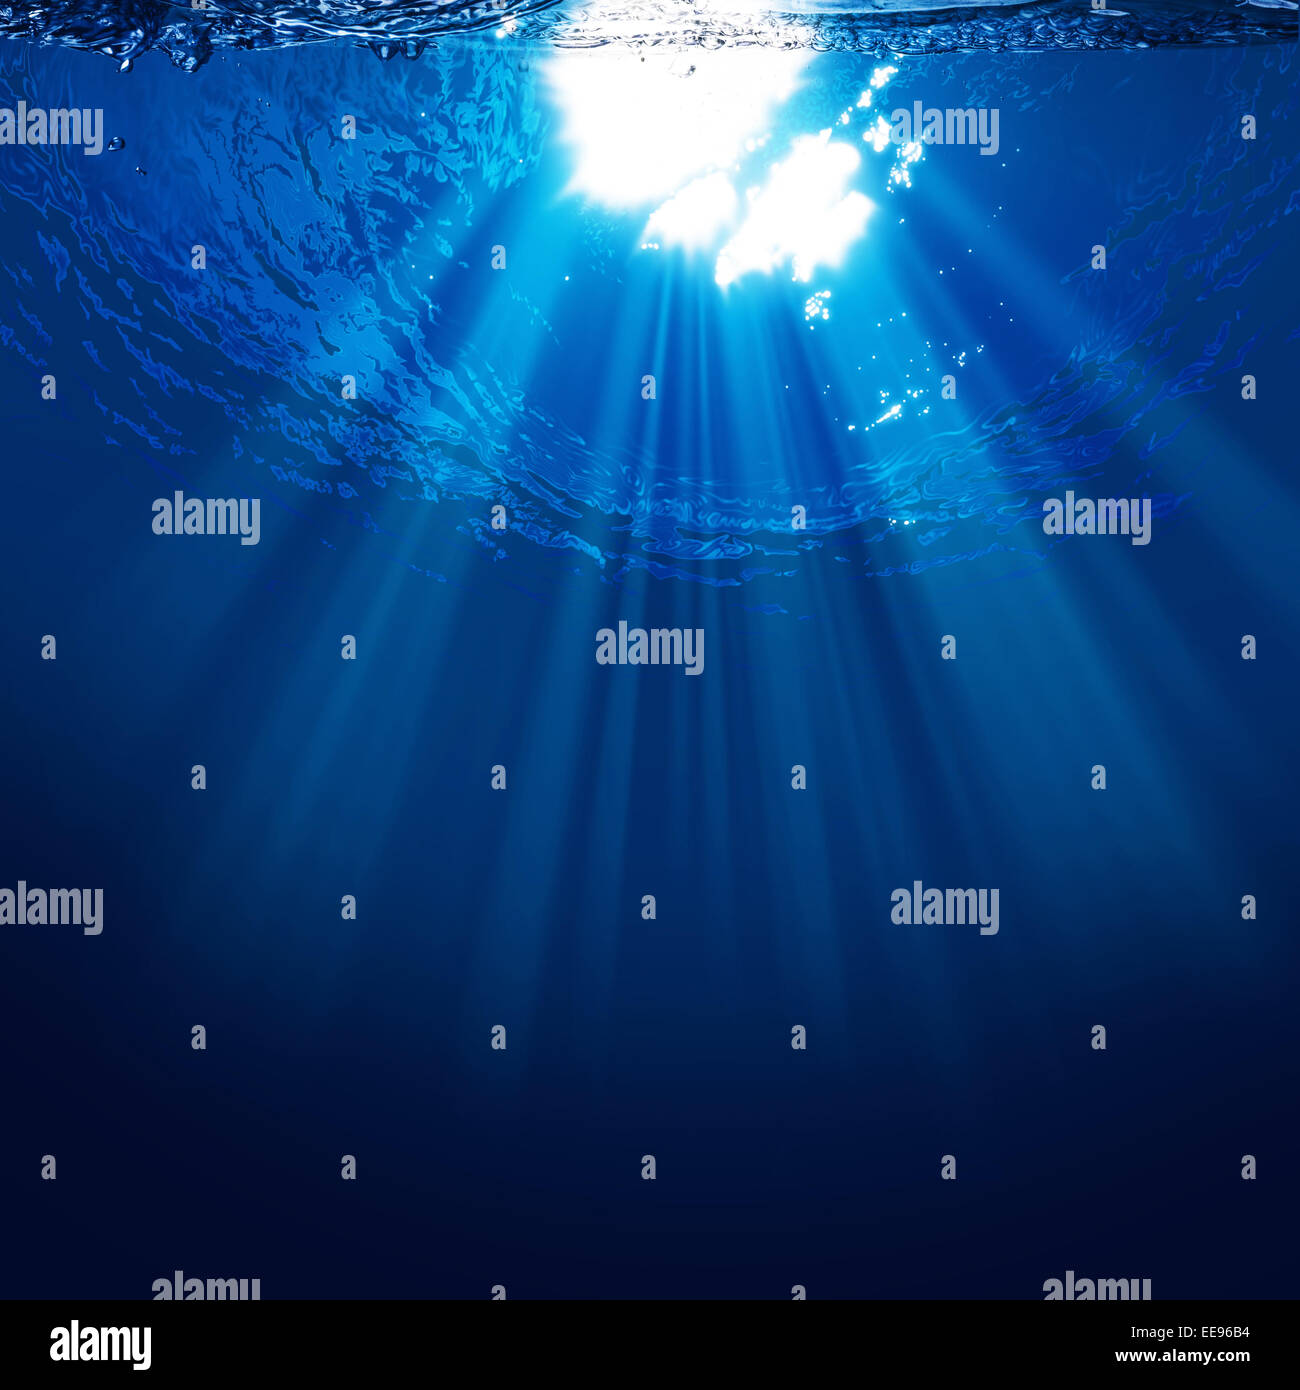 Abyss, abstract underwater backgrounds with sun beam Stock Photo